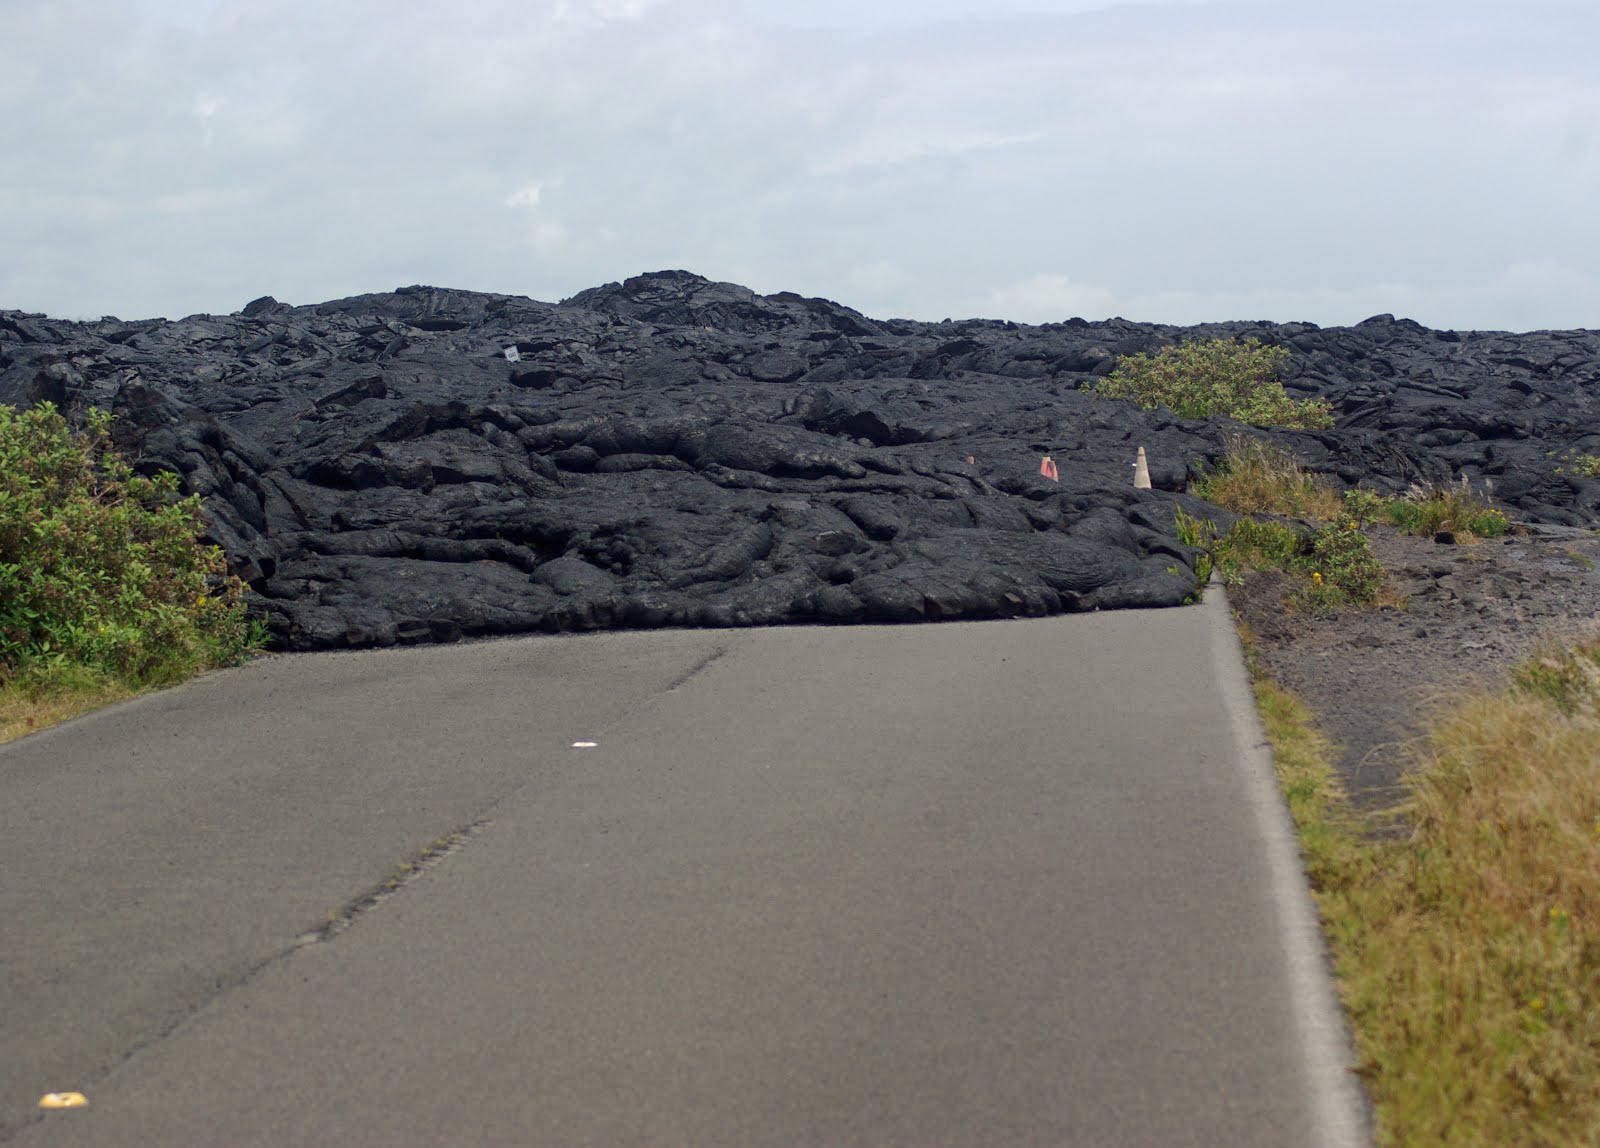 End of the road - lava flow over highway